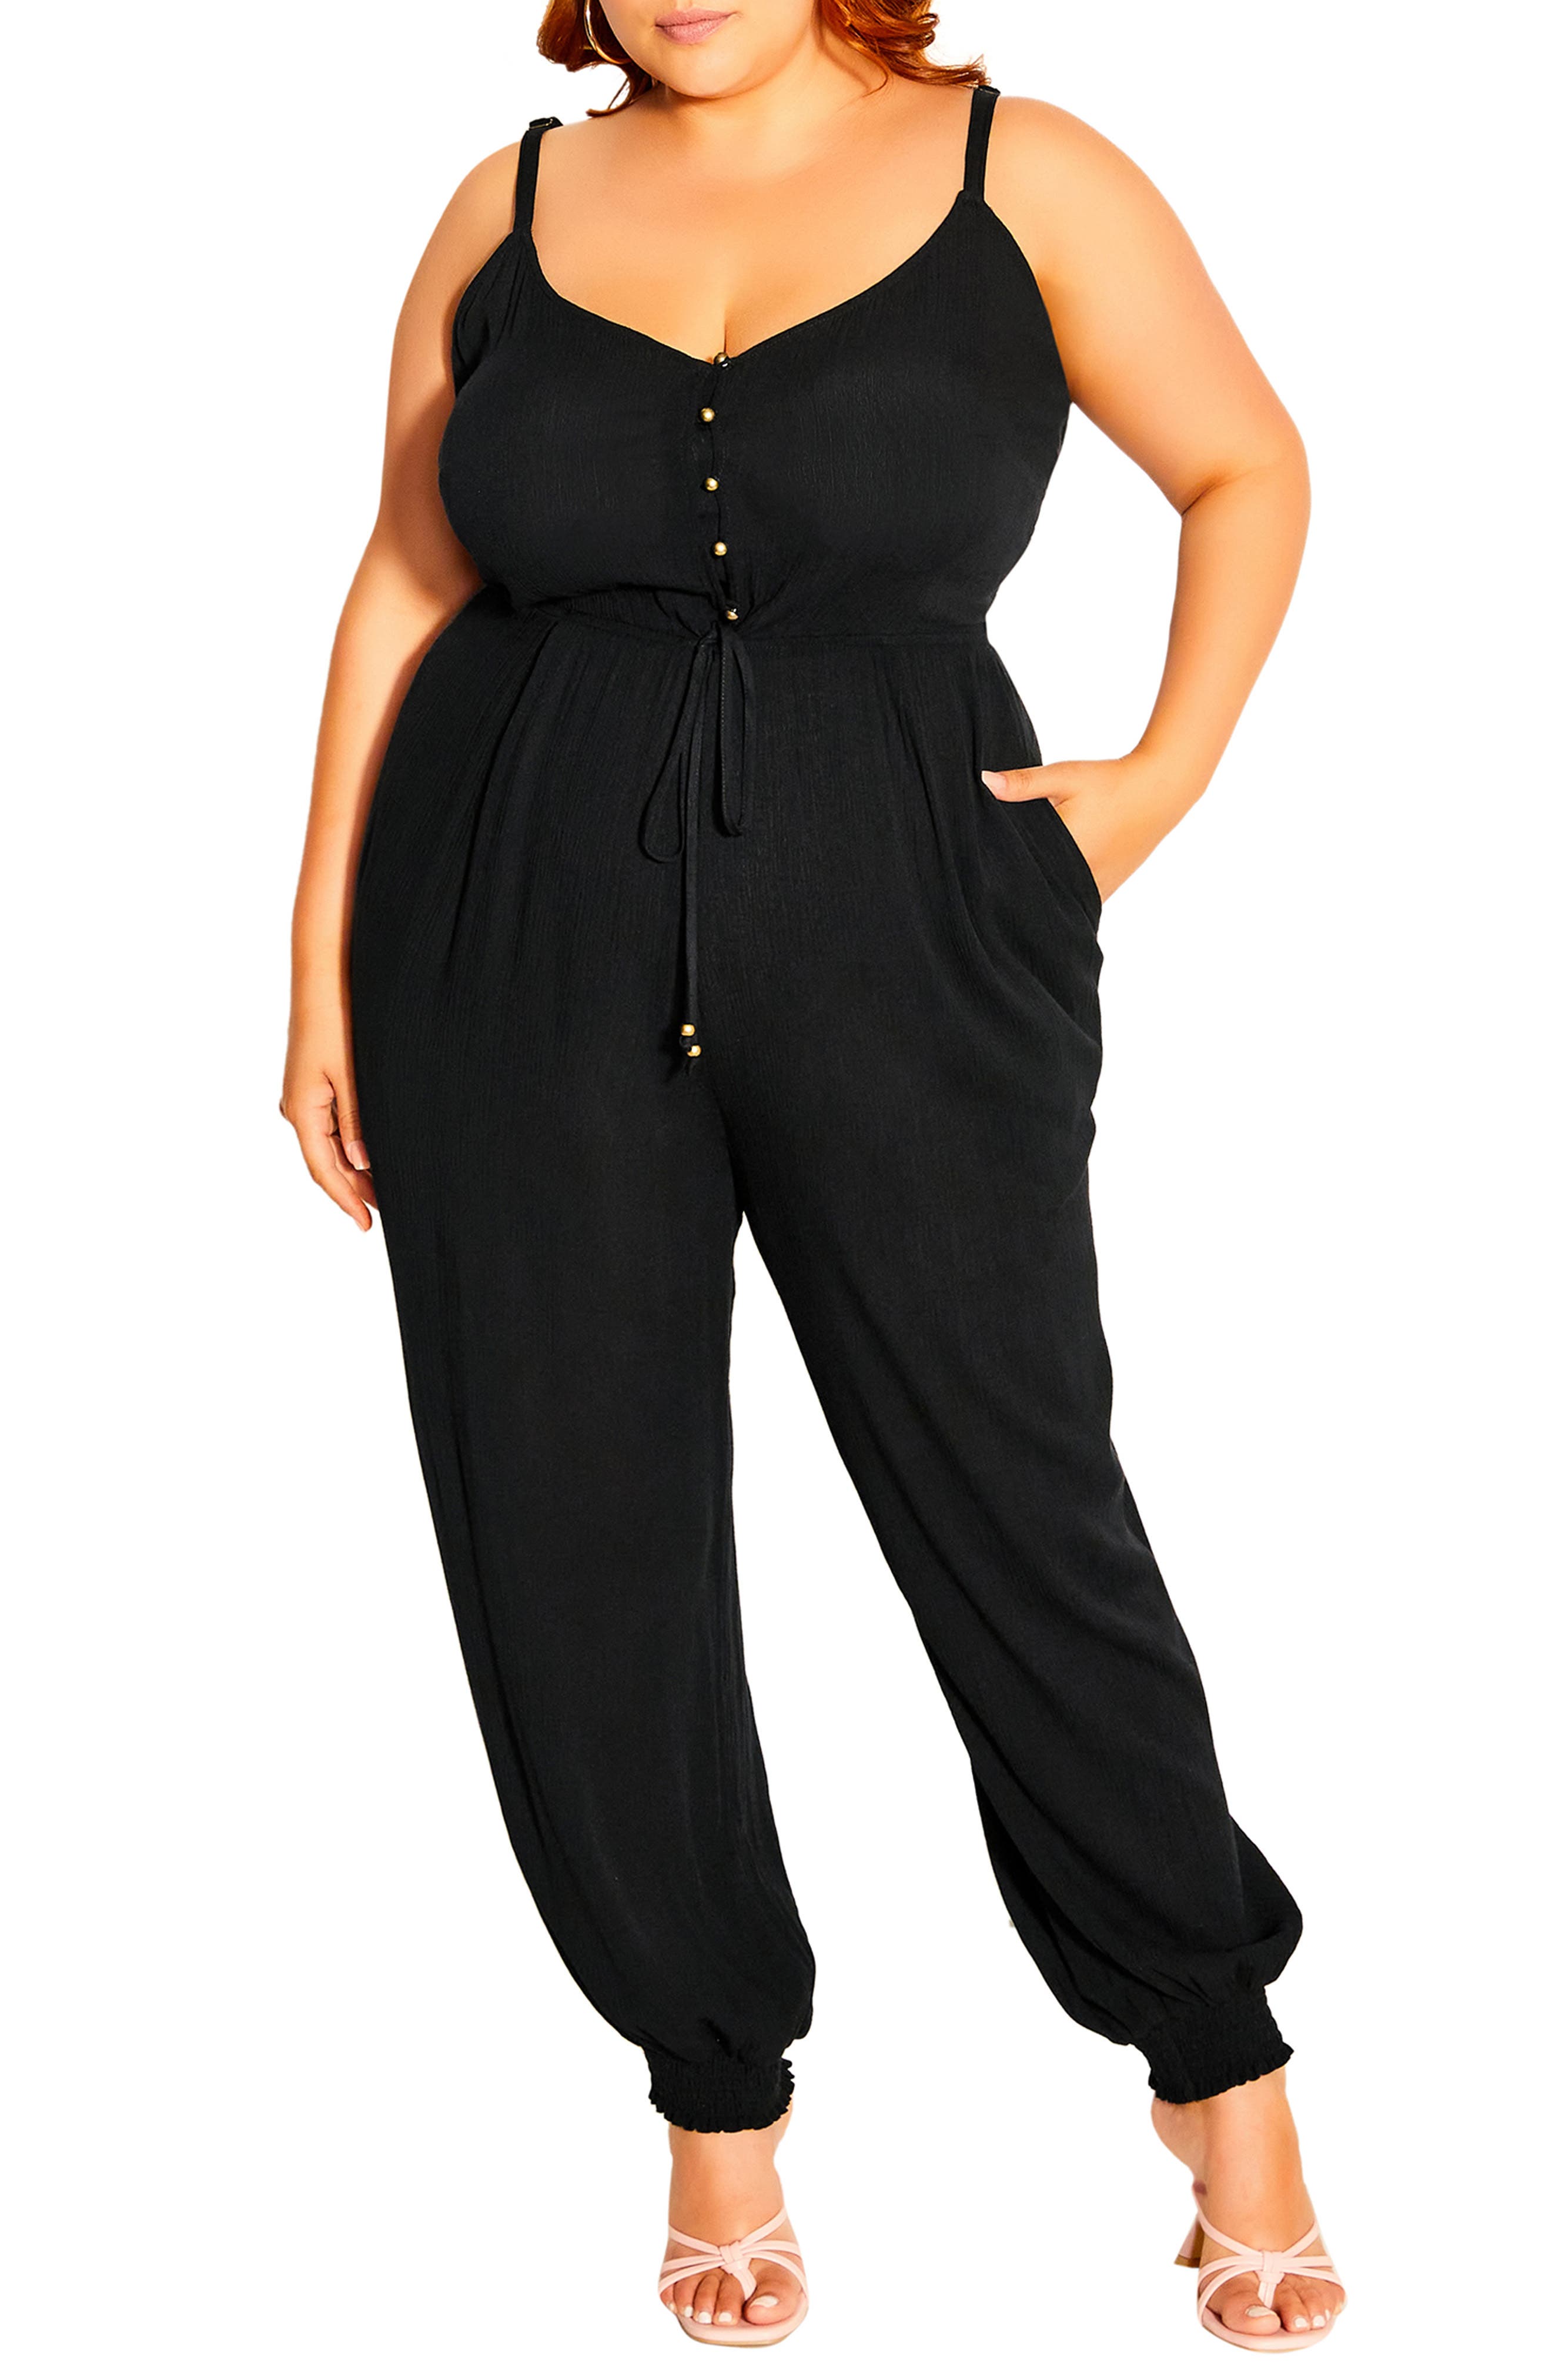 Boho Jumpsuit one size Black and White  Romper available for plus size